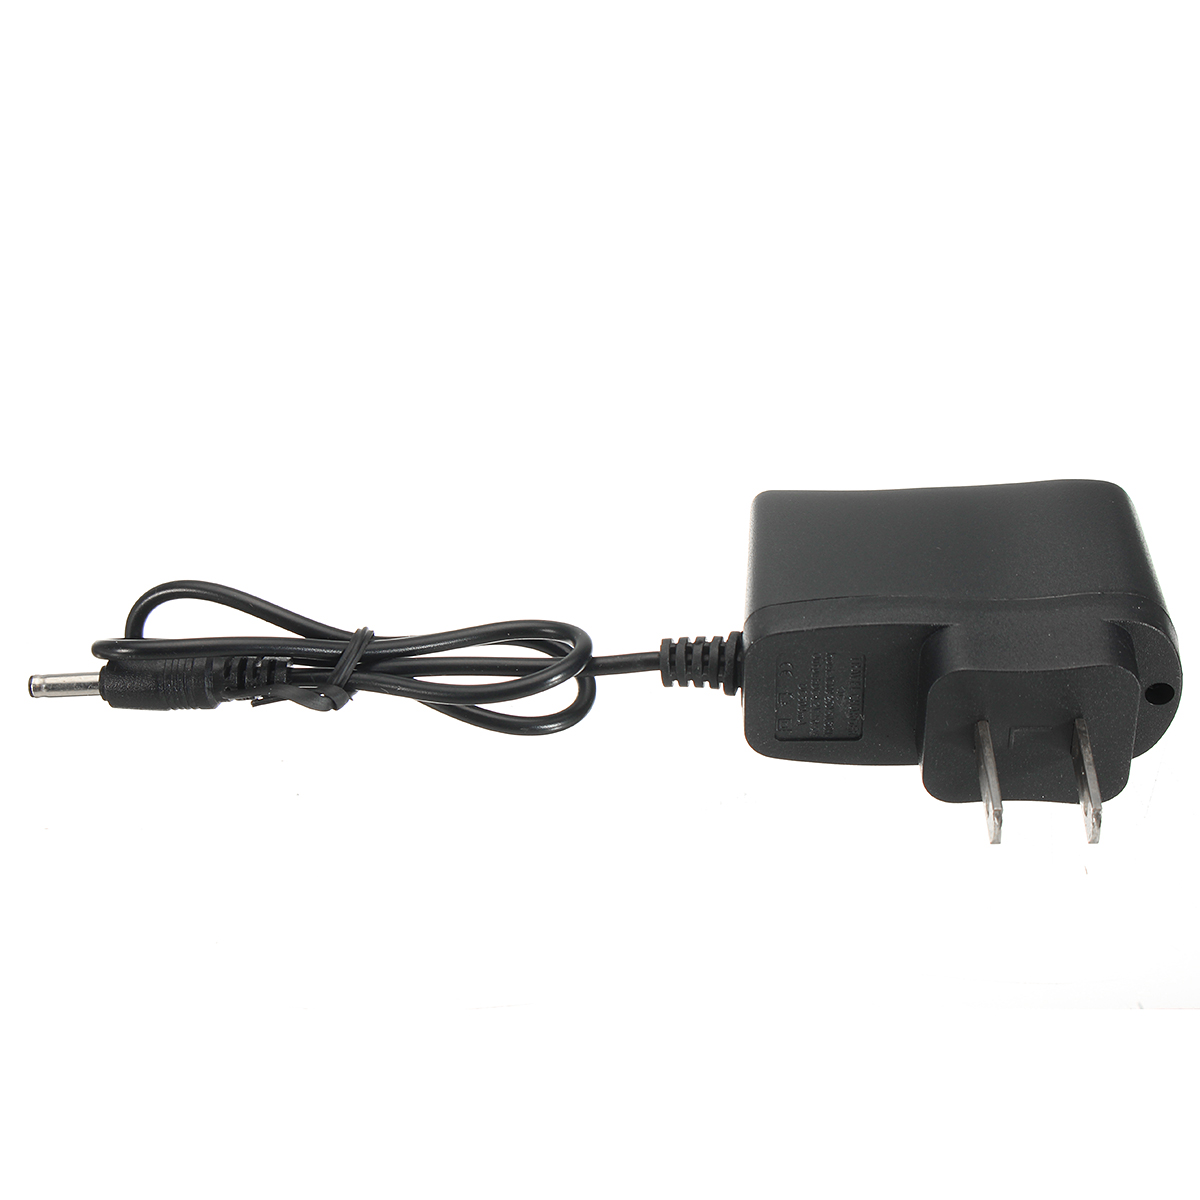 AC-100V-240V-Power-Supply-Charger-US-Plug-Power-Supply-Adapter-35MM-DC-Head-1521983-5